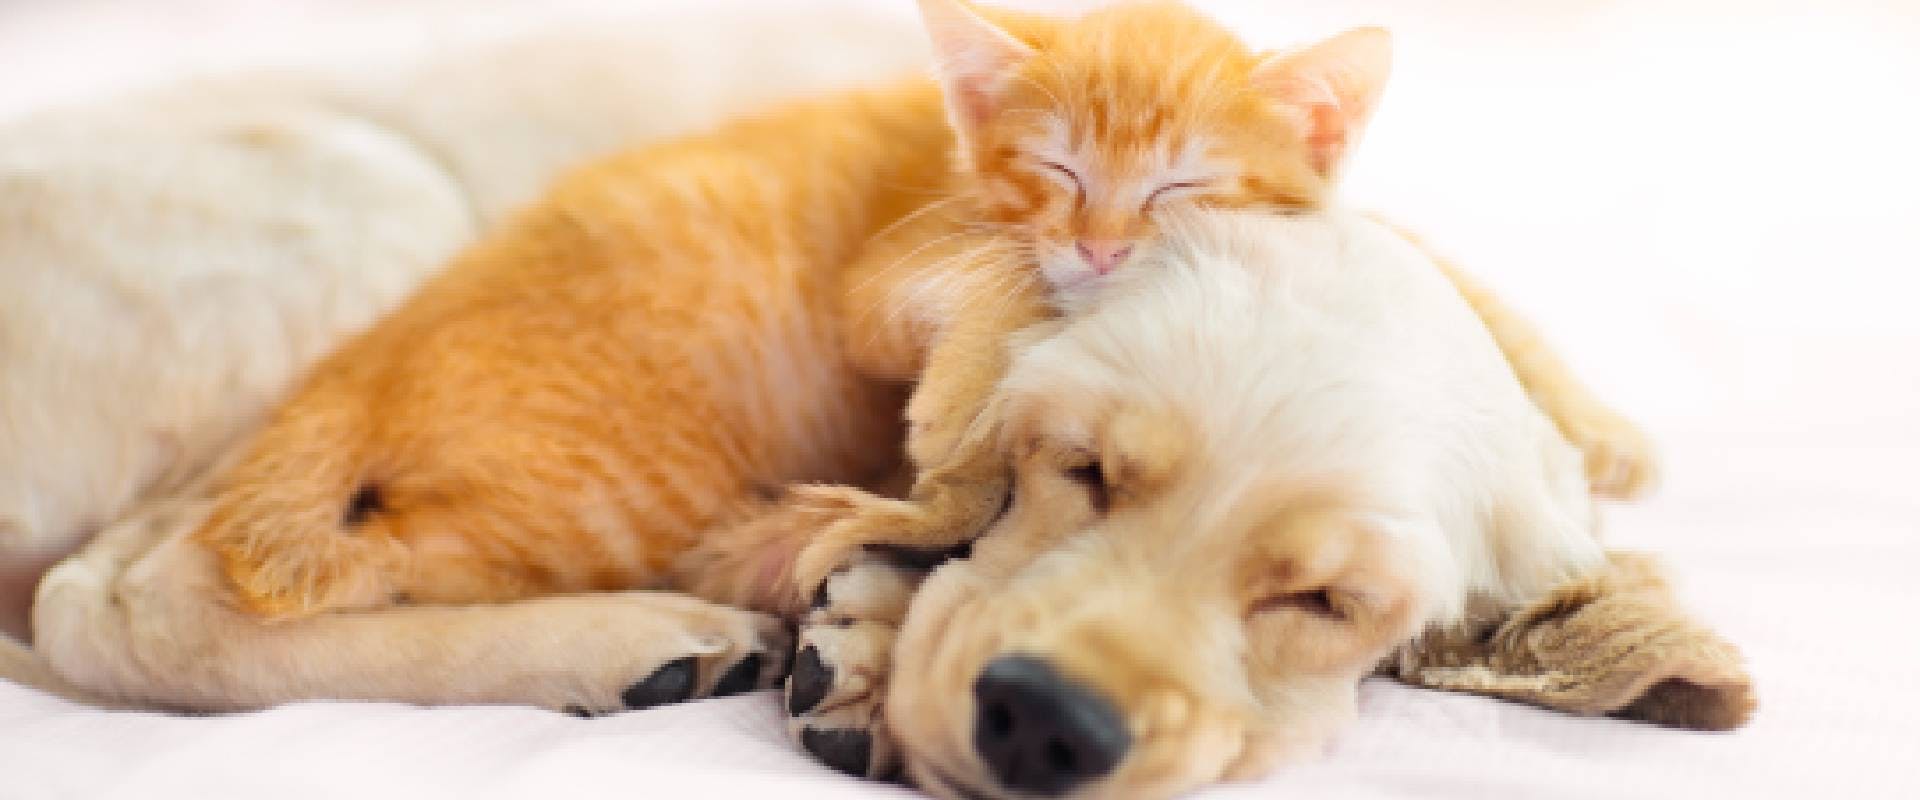 Golden Retriever and a cat sleeping next to one another